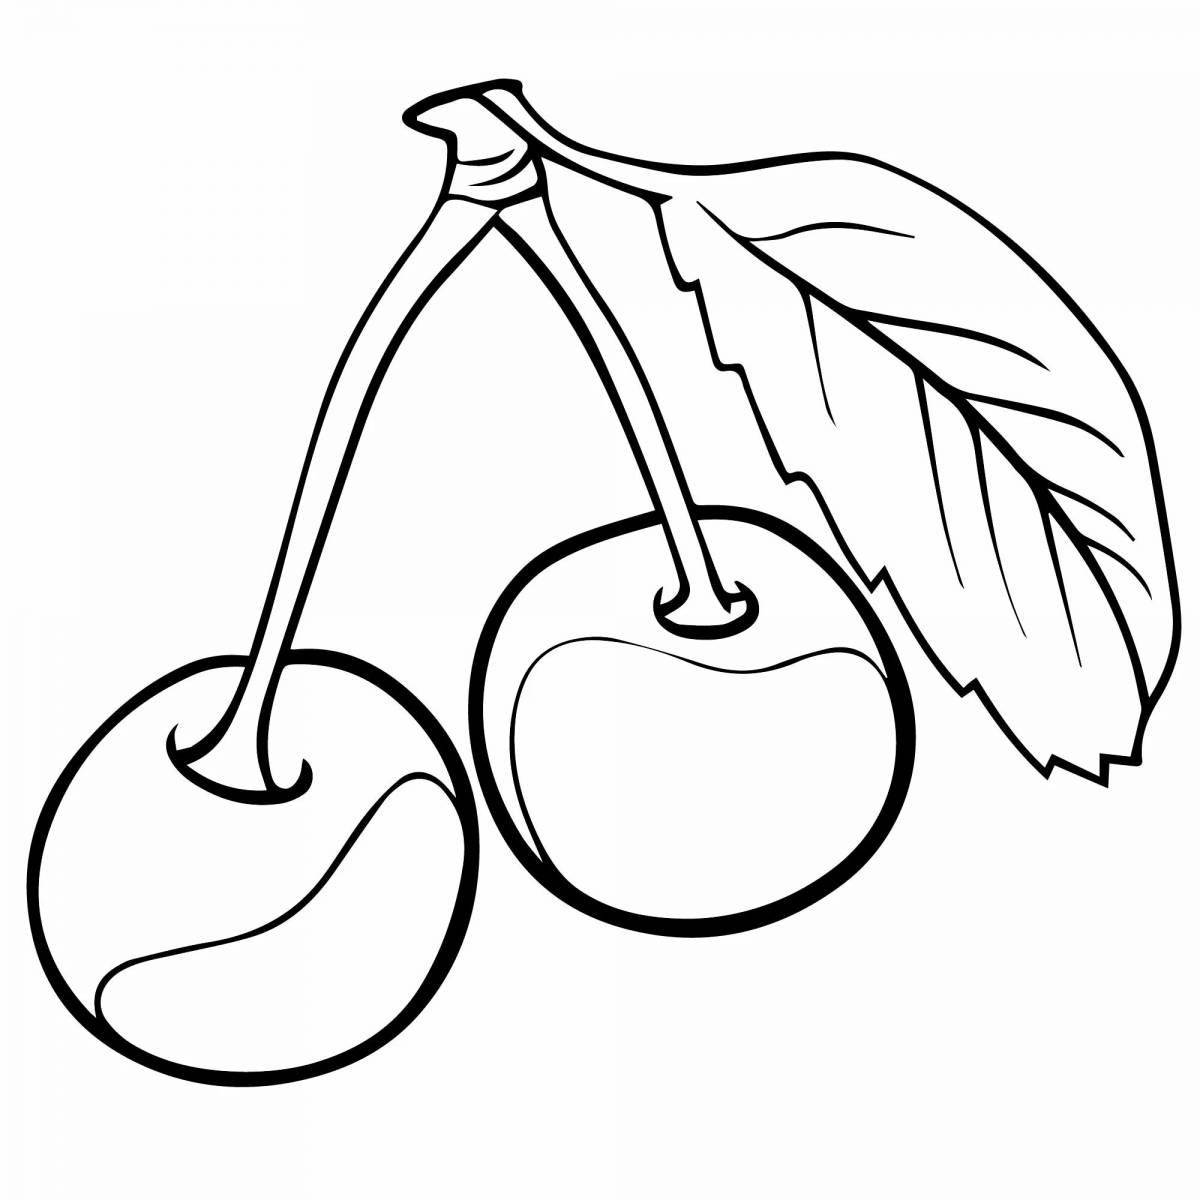 Sunny cherry coloring page